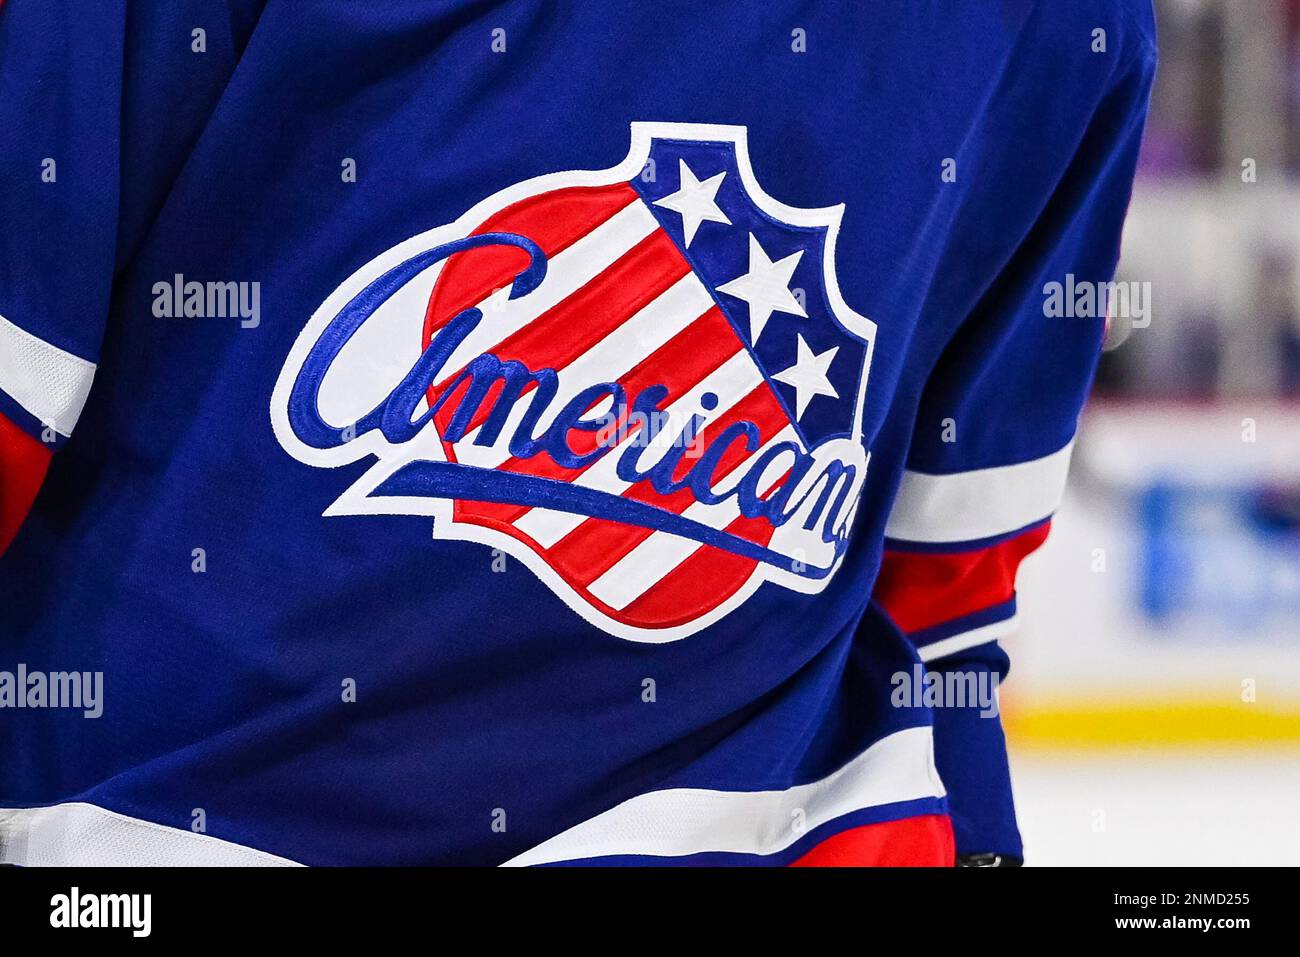 LAVAL, QC - OCTOBER 30: View of a Rochester Americans logo on a jersey  during the Rochester Americans versus the Laval Rocket game on October 30,  2021, at Place Bell in Laval